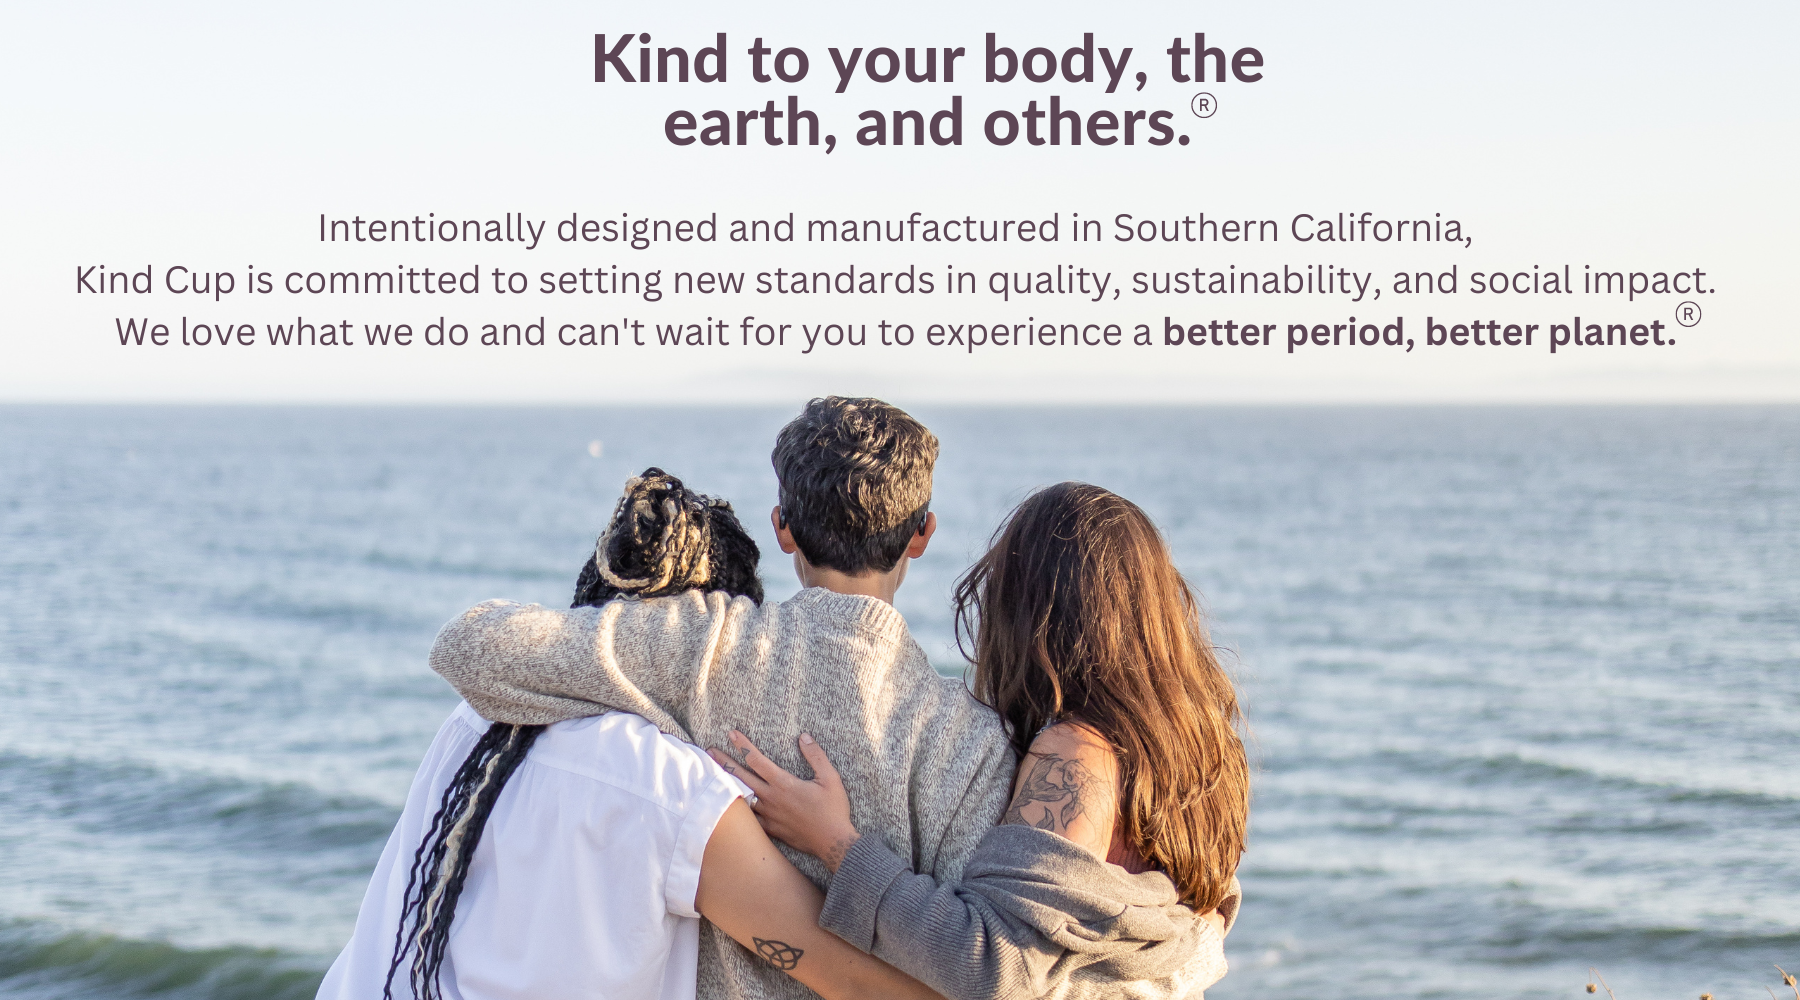 Kind to your body, the earth, and others.   Intentionally designed and manufactured in Southern California,  Kind Cup is committed to setting new standards in quality, sustainability, and social impact.  We love what we do and can't wait for you to experience a better period, better planet. 